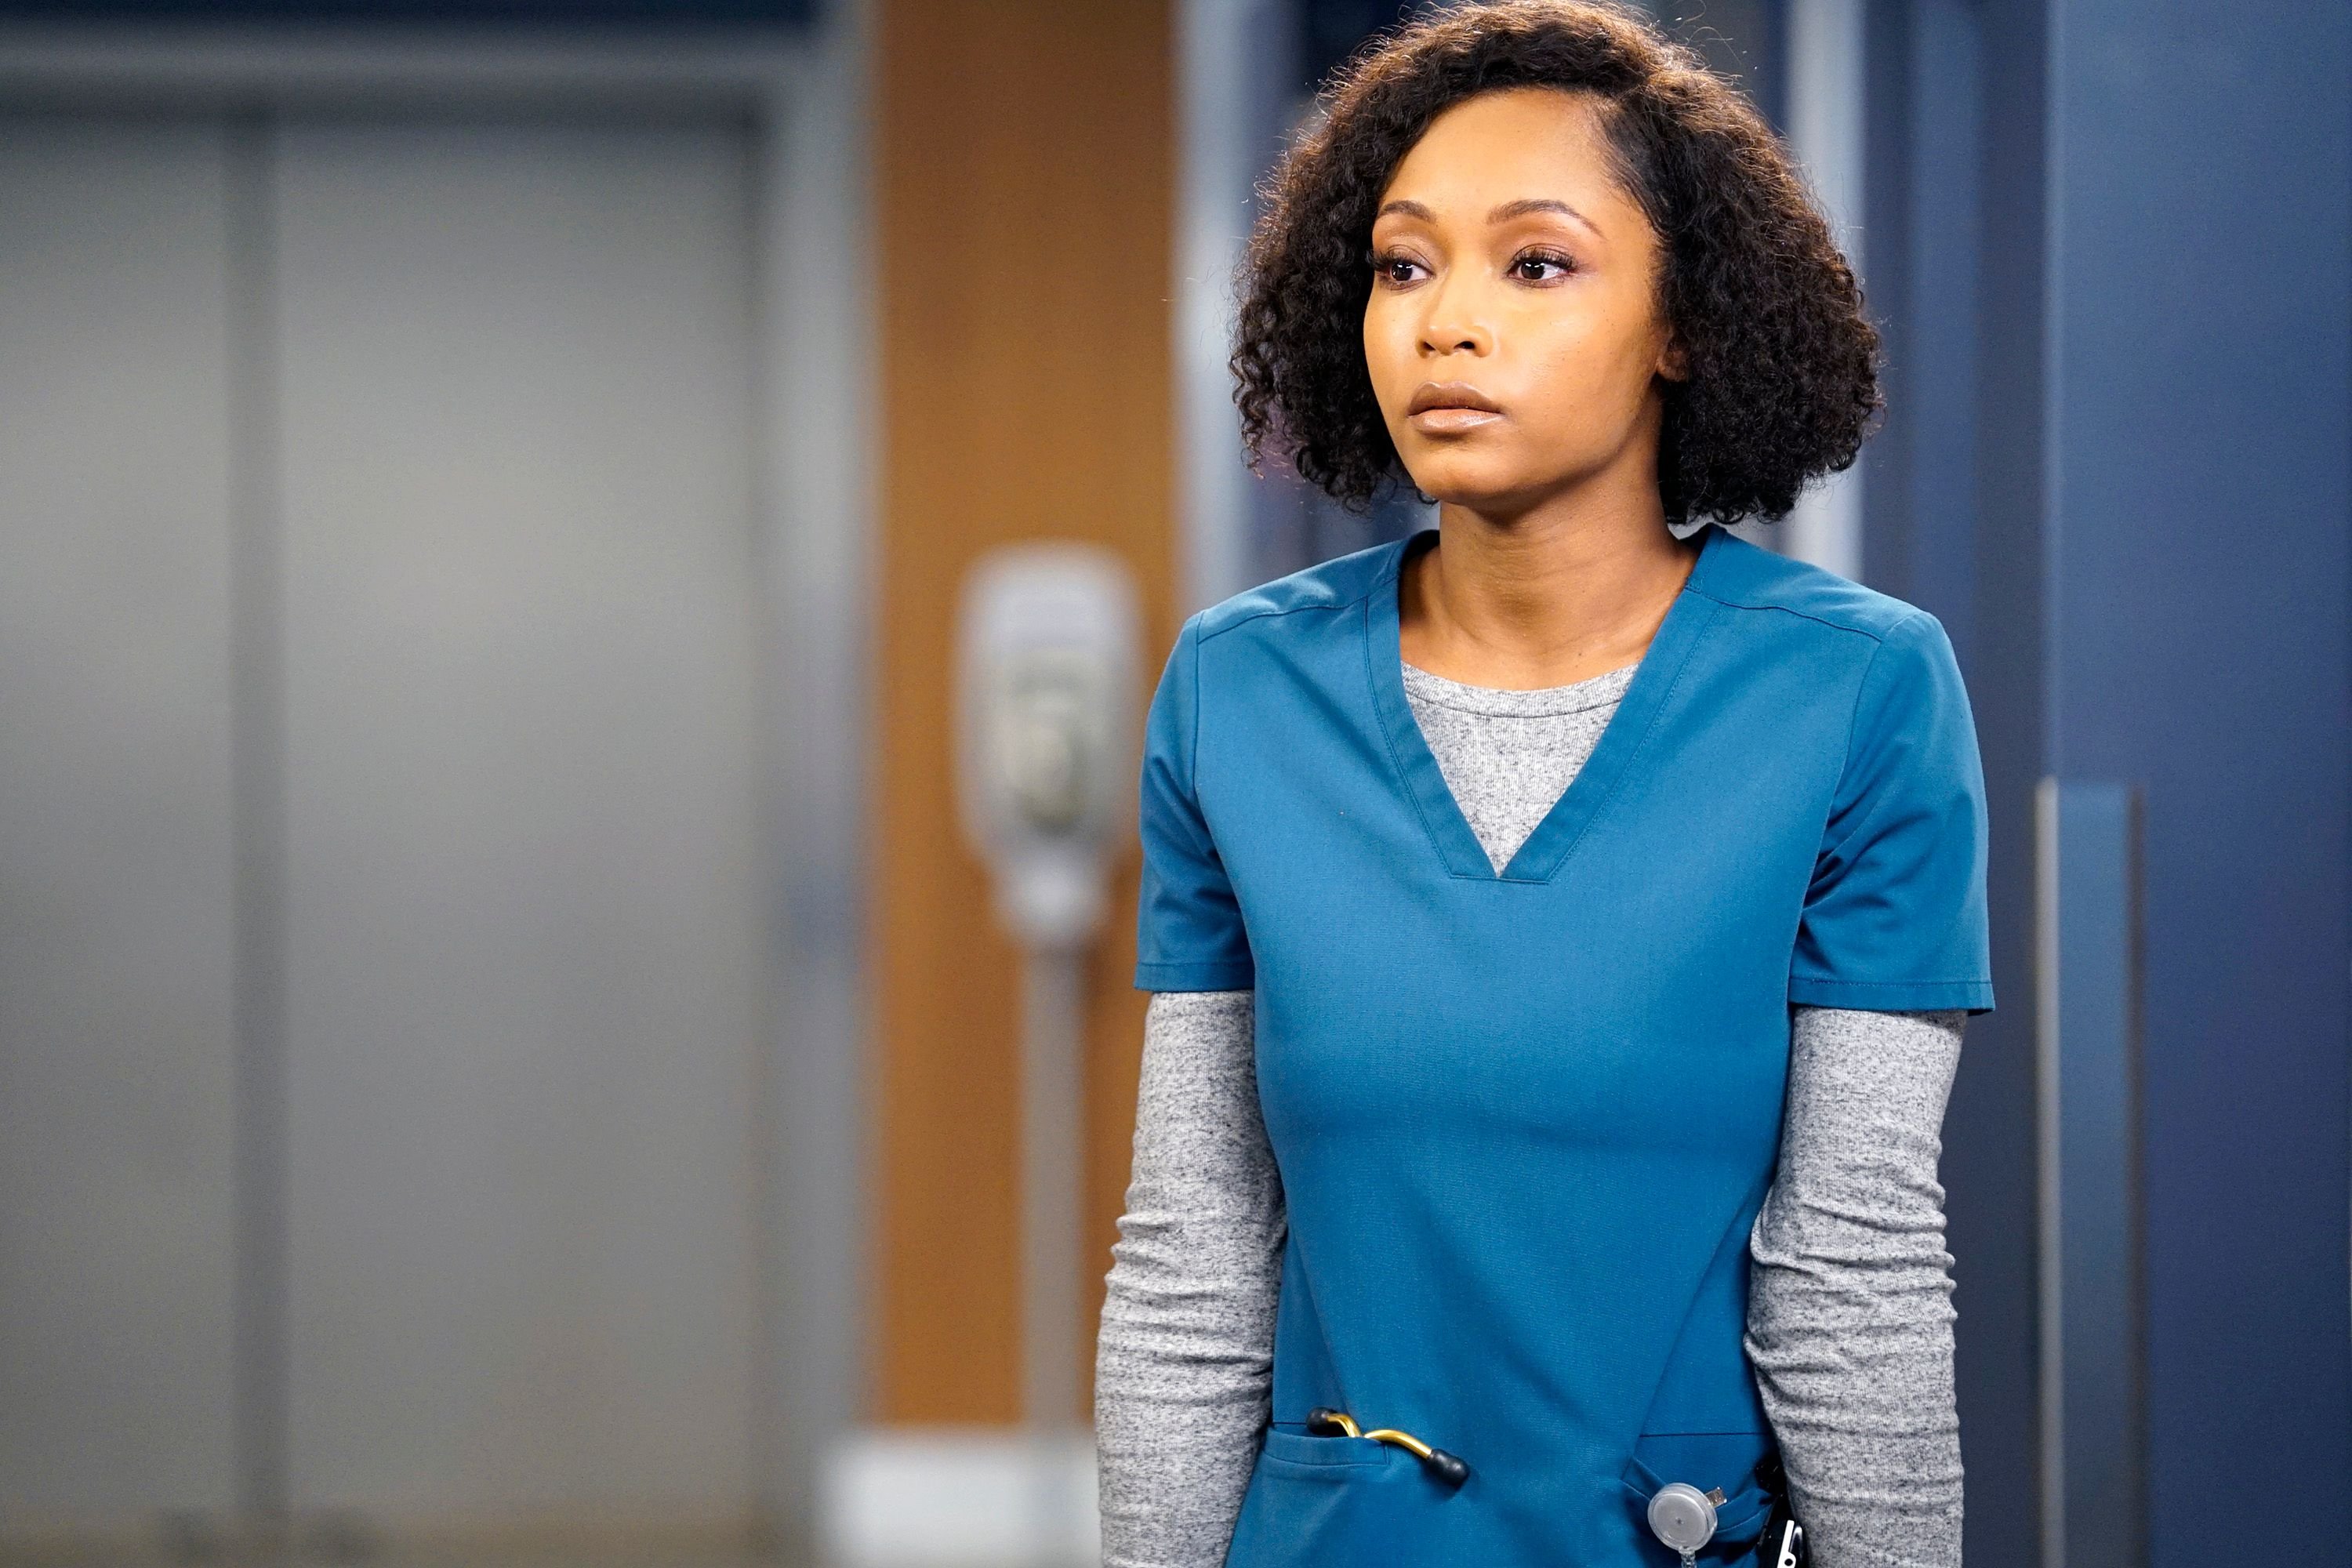 Yaya DaCosta as April Sexton on the set of "Chicago Med" | Source: Getty Images